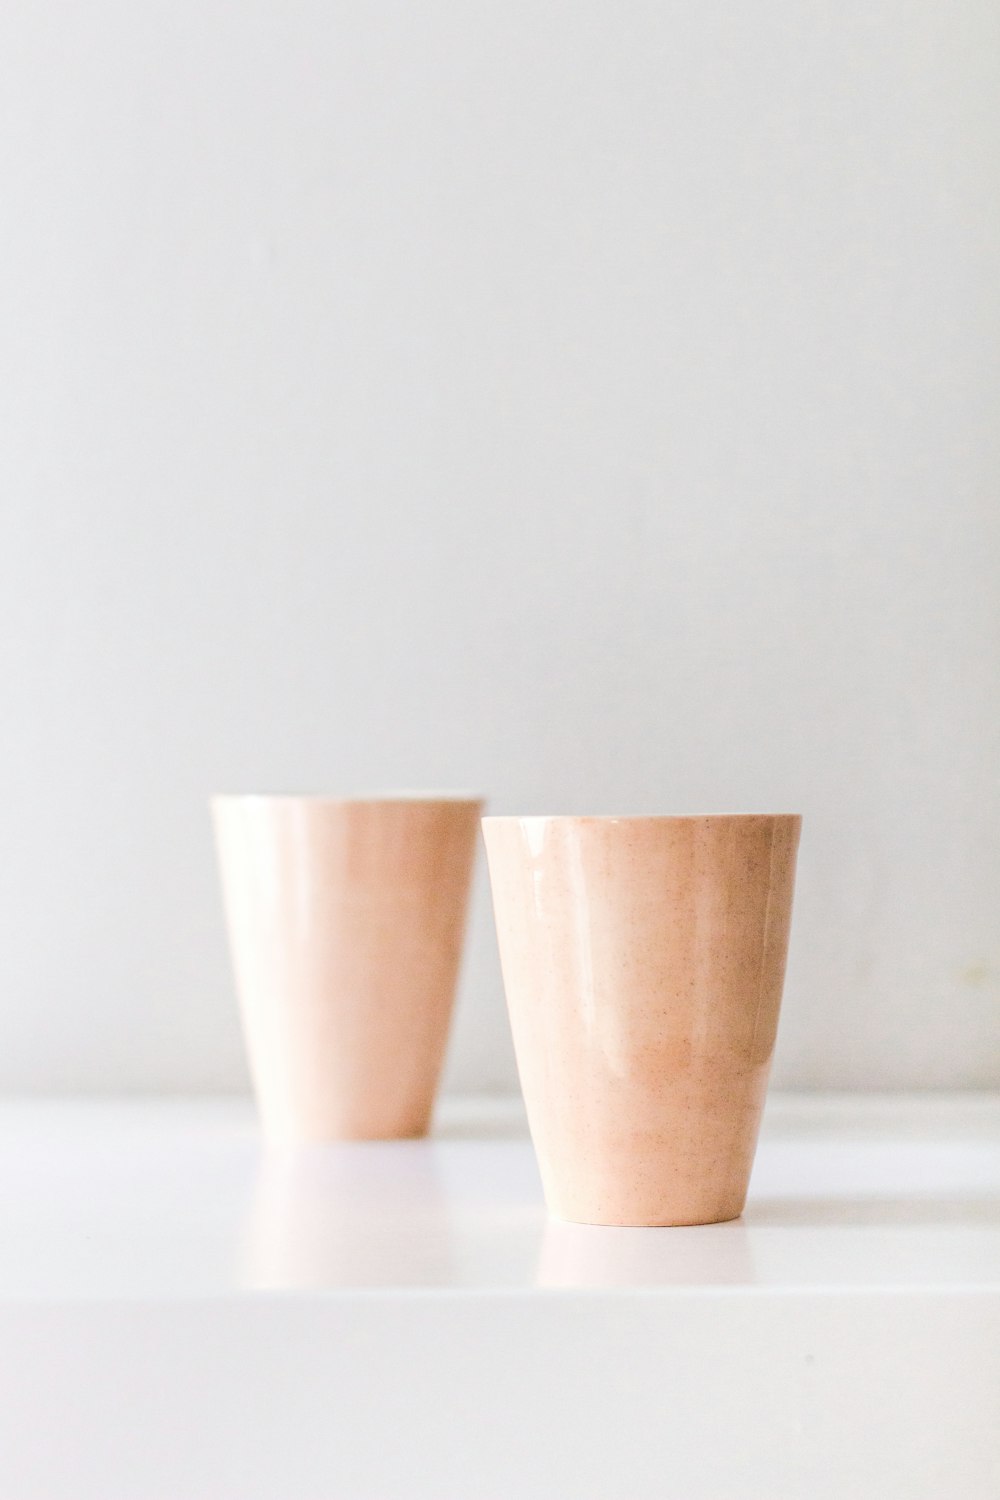 2 brown plastic cups on white table